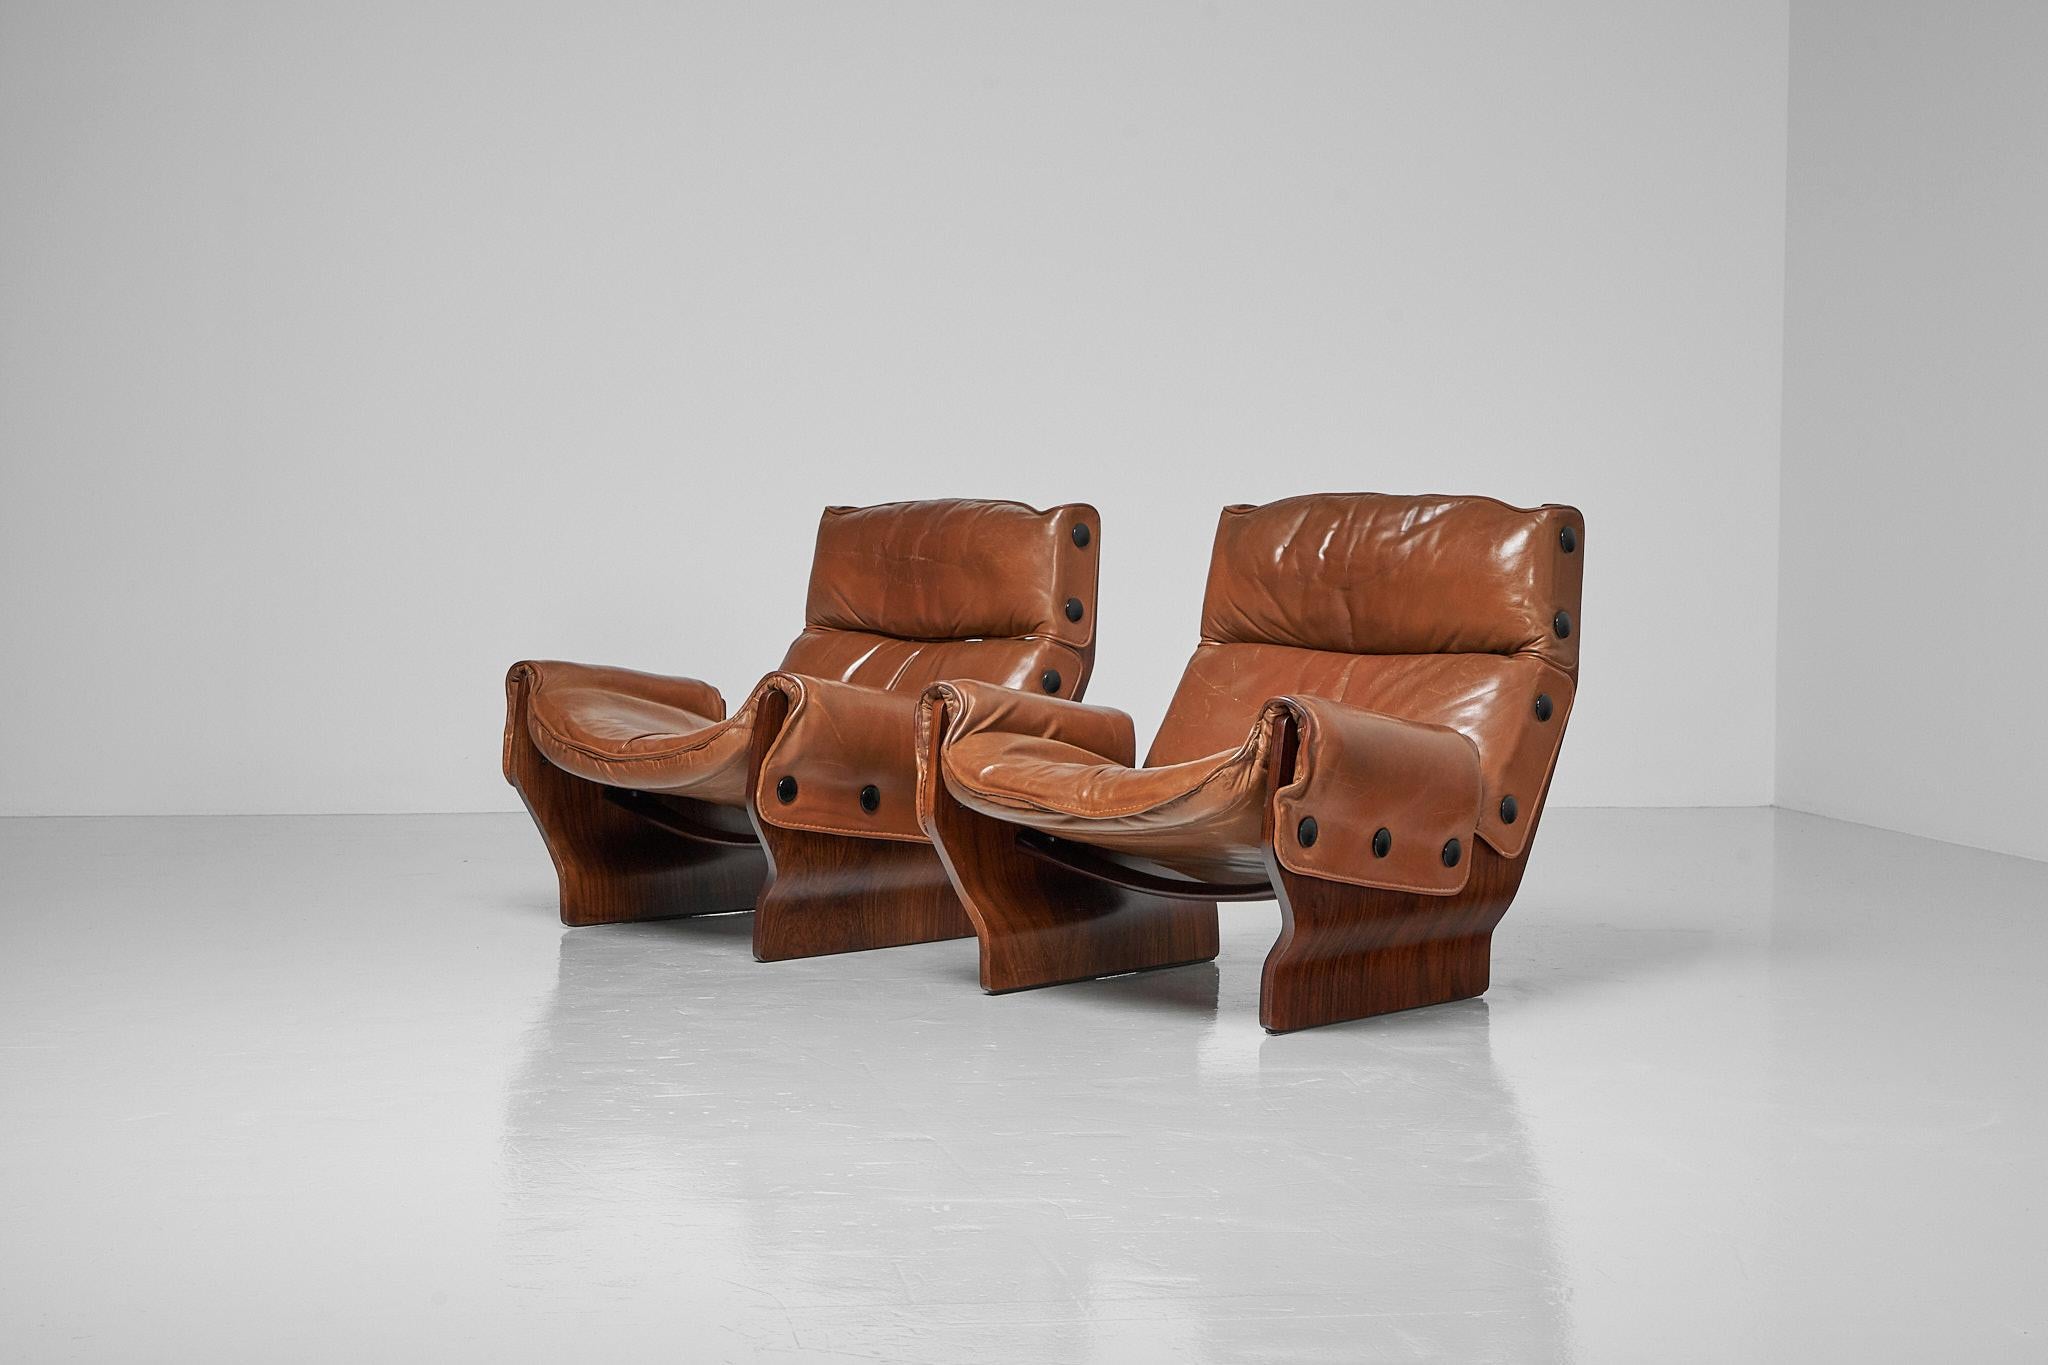 Iconic so-called pair of 'Canada' lounge chairs model P110 designed by Osvaldo Borsani and manufactured by Tecno, Italy, 1965. The Canada chair is constructed by 2 moulded plywood side panels, connected with 2 bent wooden cross bars, which holds the